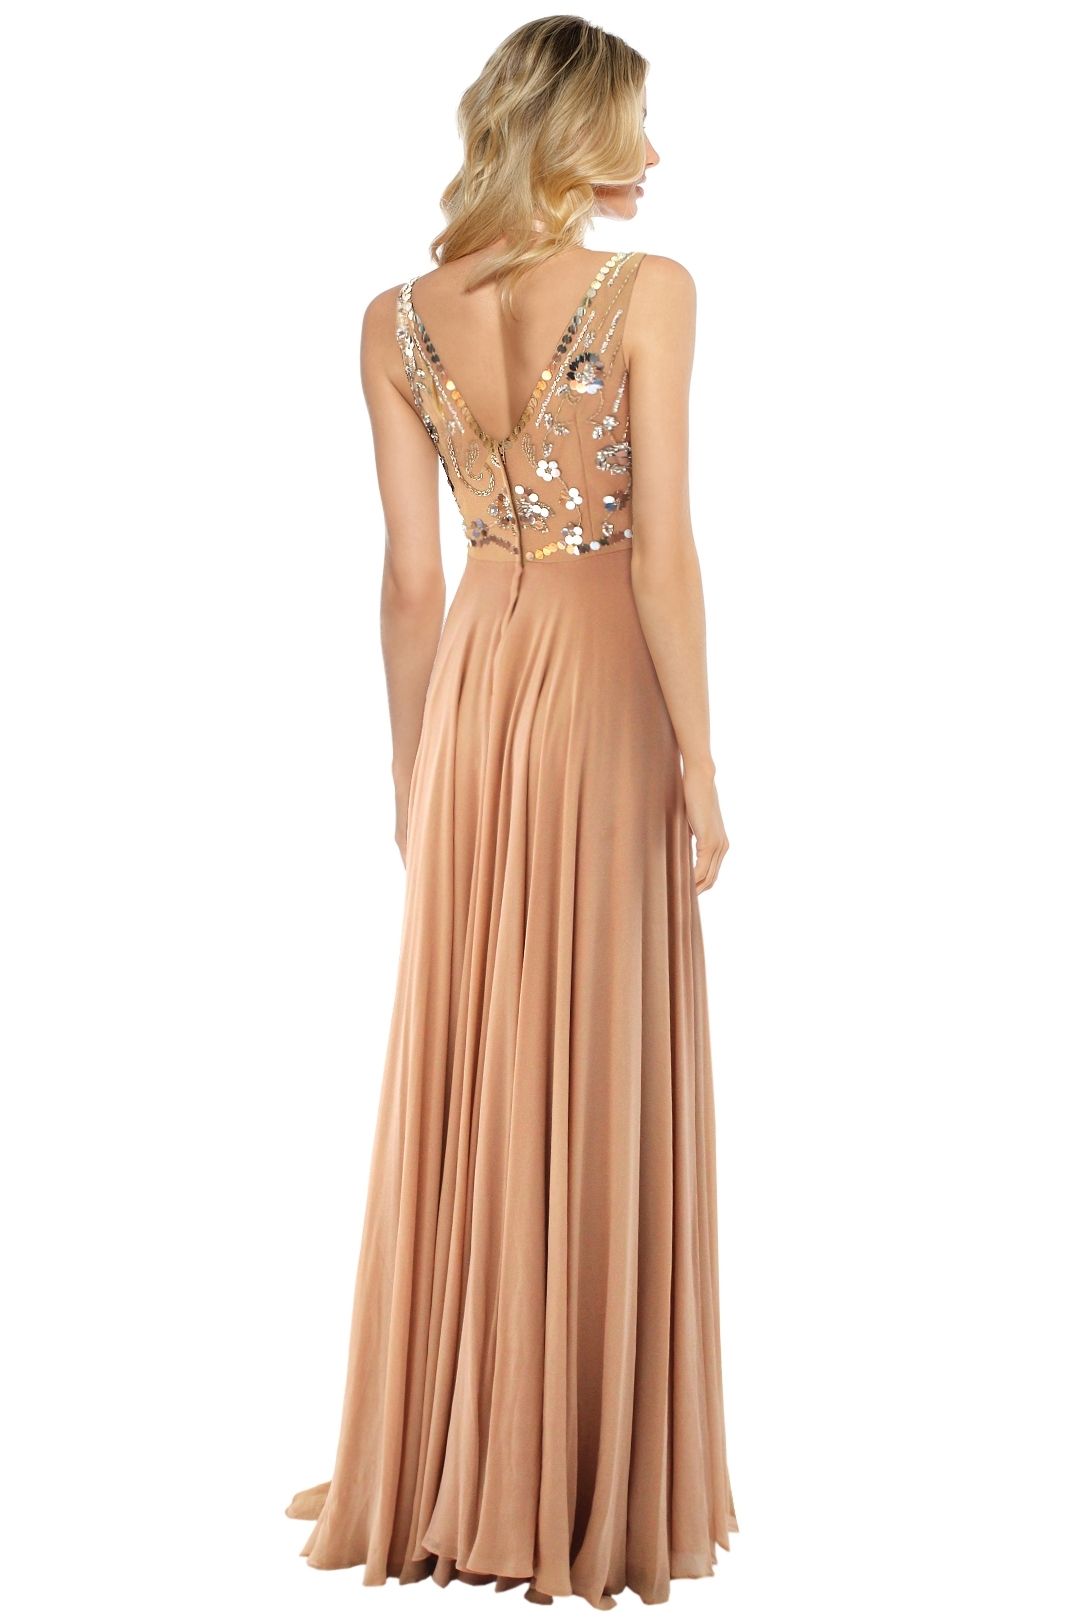 Alex Perry - Luna Gown - Pink - Back